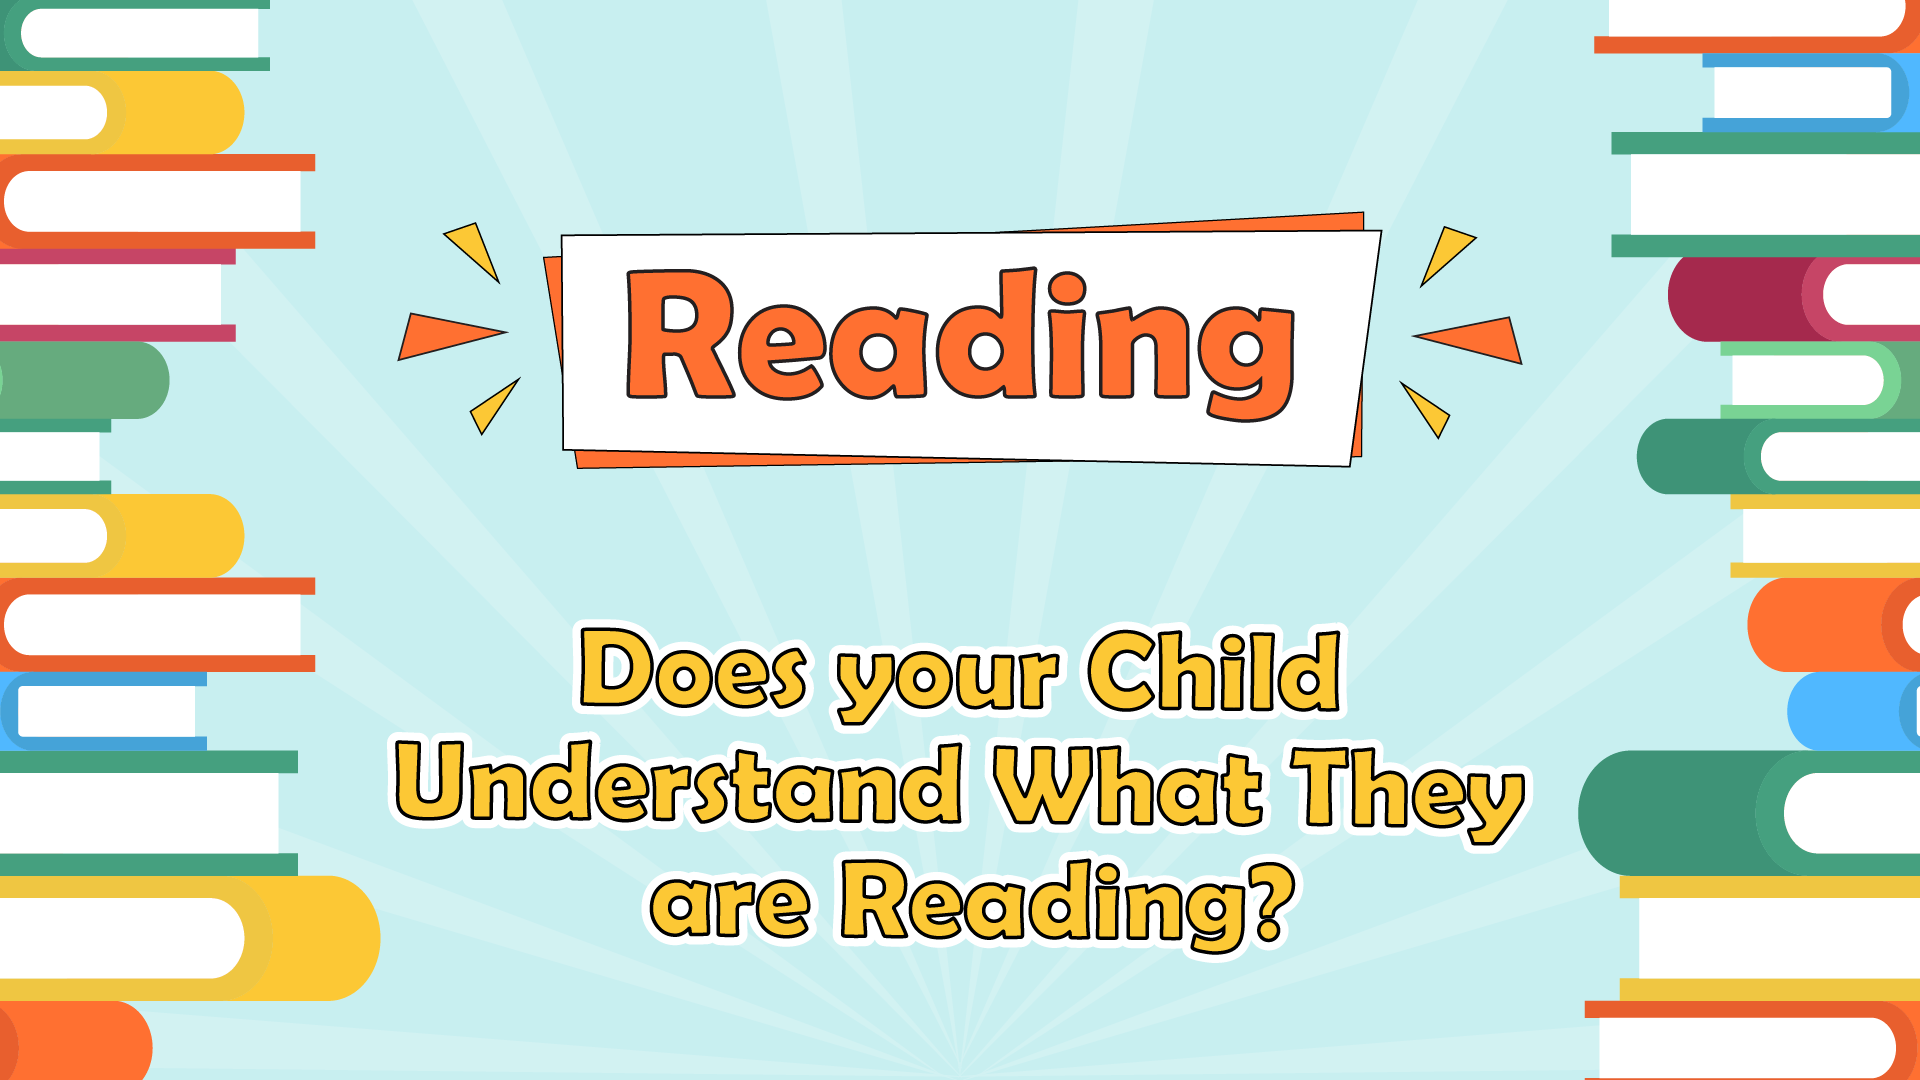 Building Great Minds: Reading and Whether your child understands what they read?